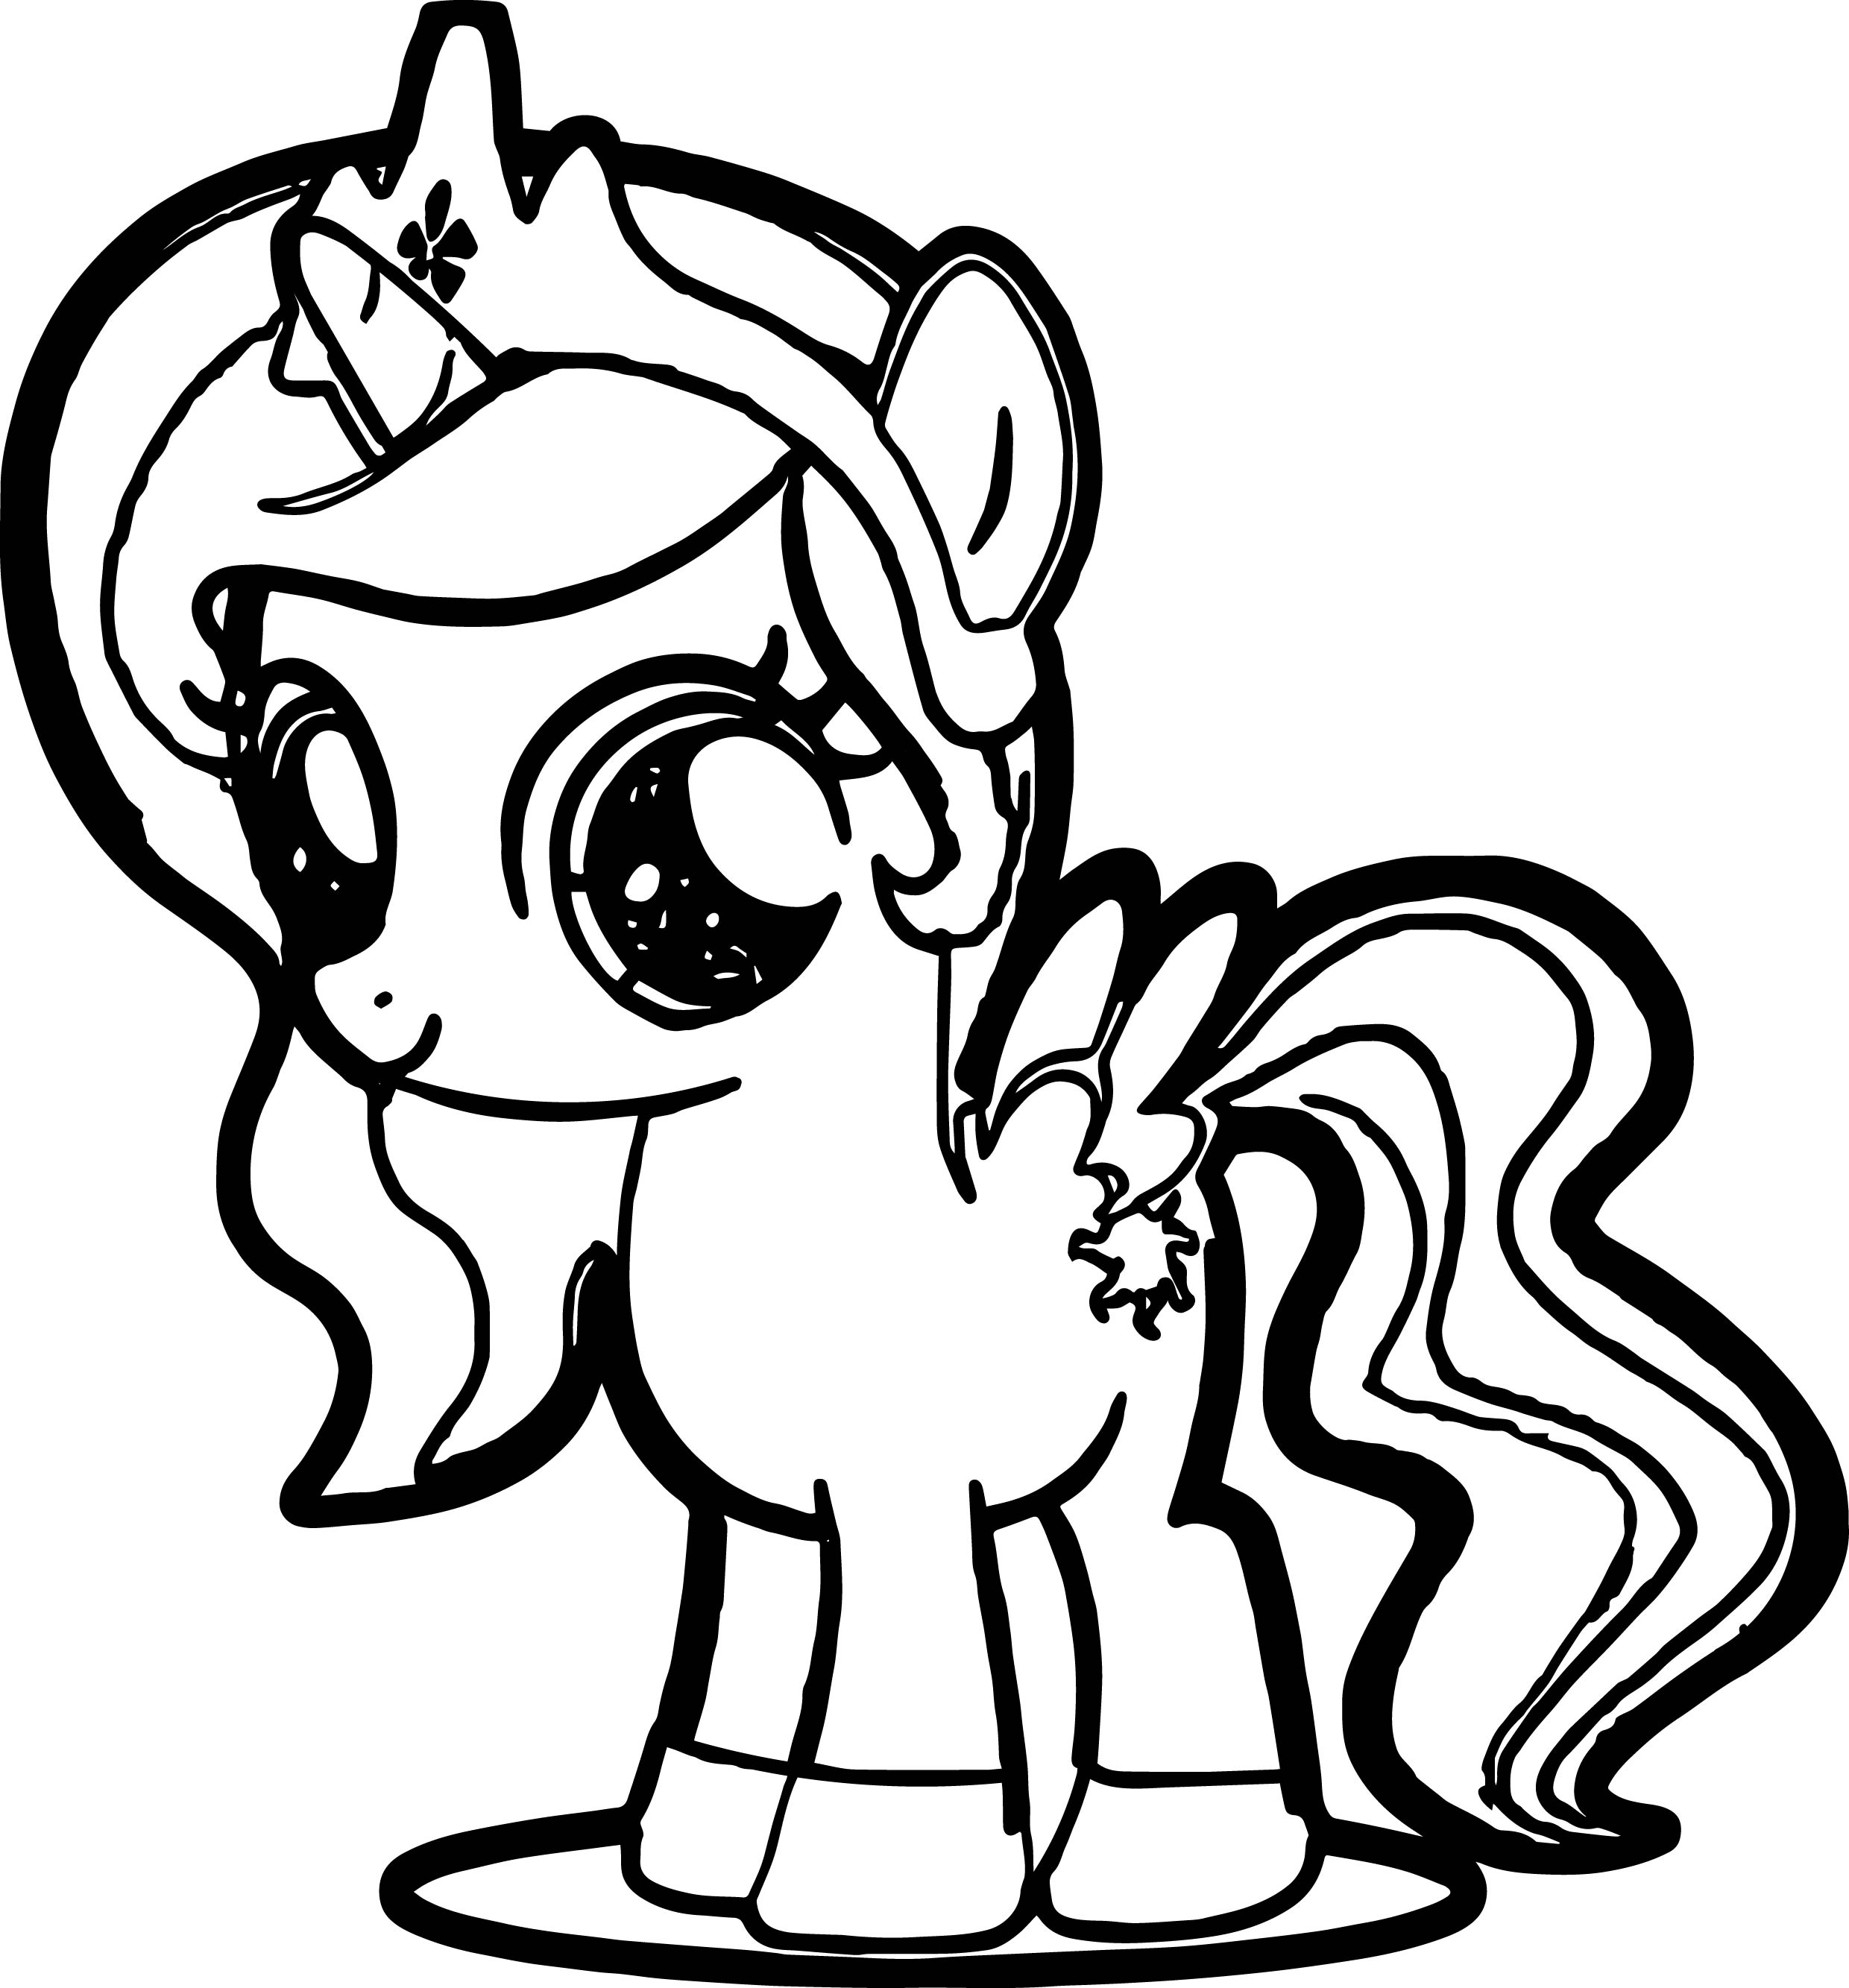 Cute My Little Pony Coloring Pages at Free printable